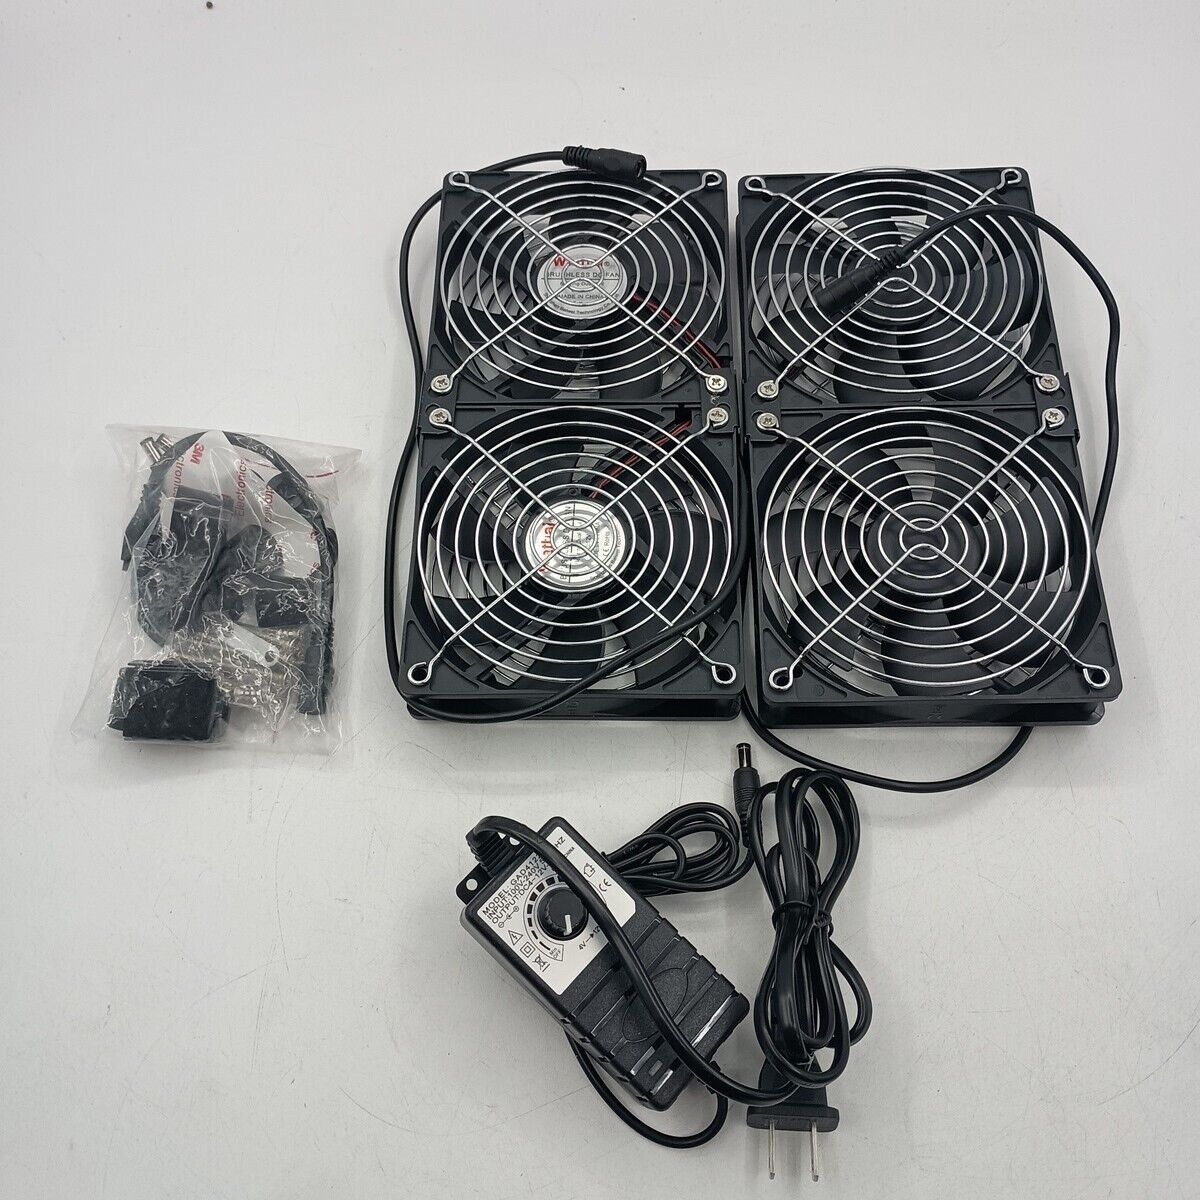 Big Airflow 4X 120Mm Fans with 100V-240V AC Powered Speed Controller for DIY GPU